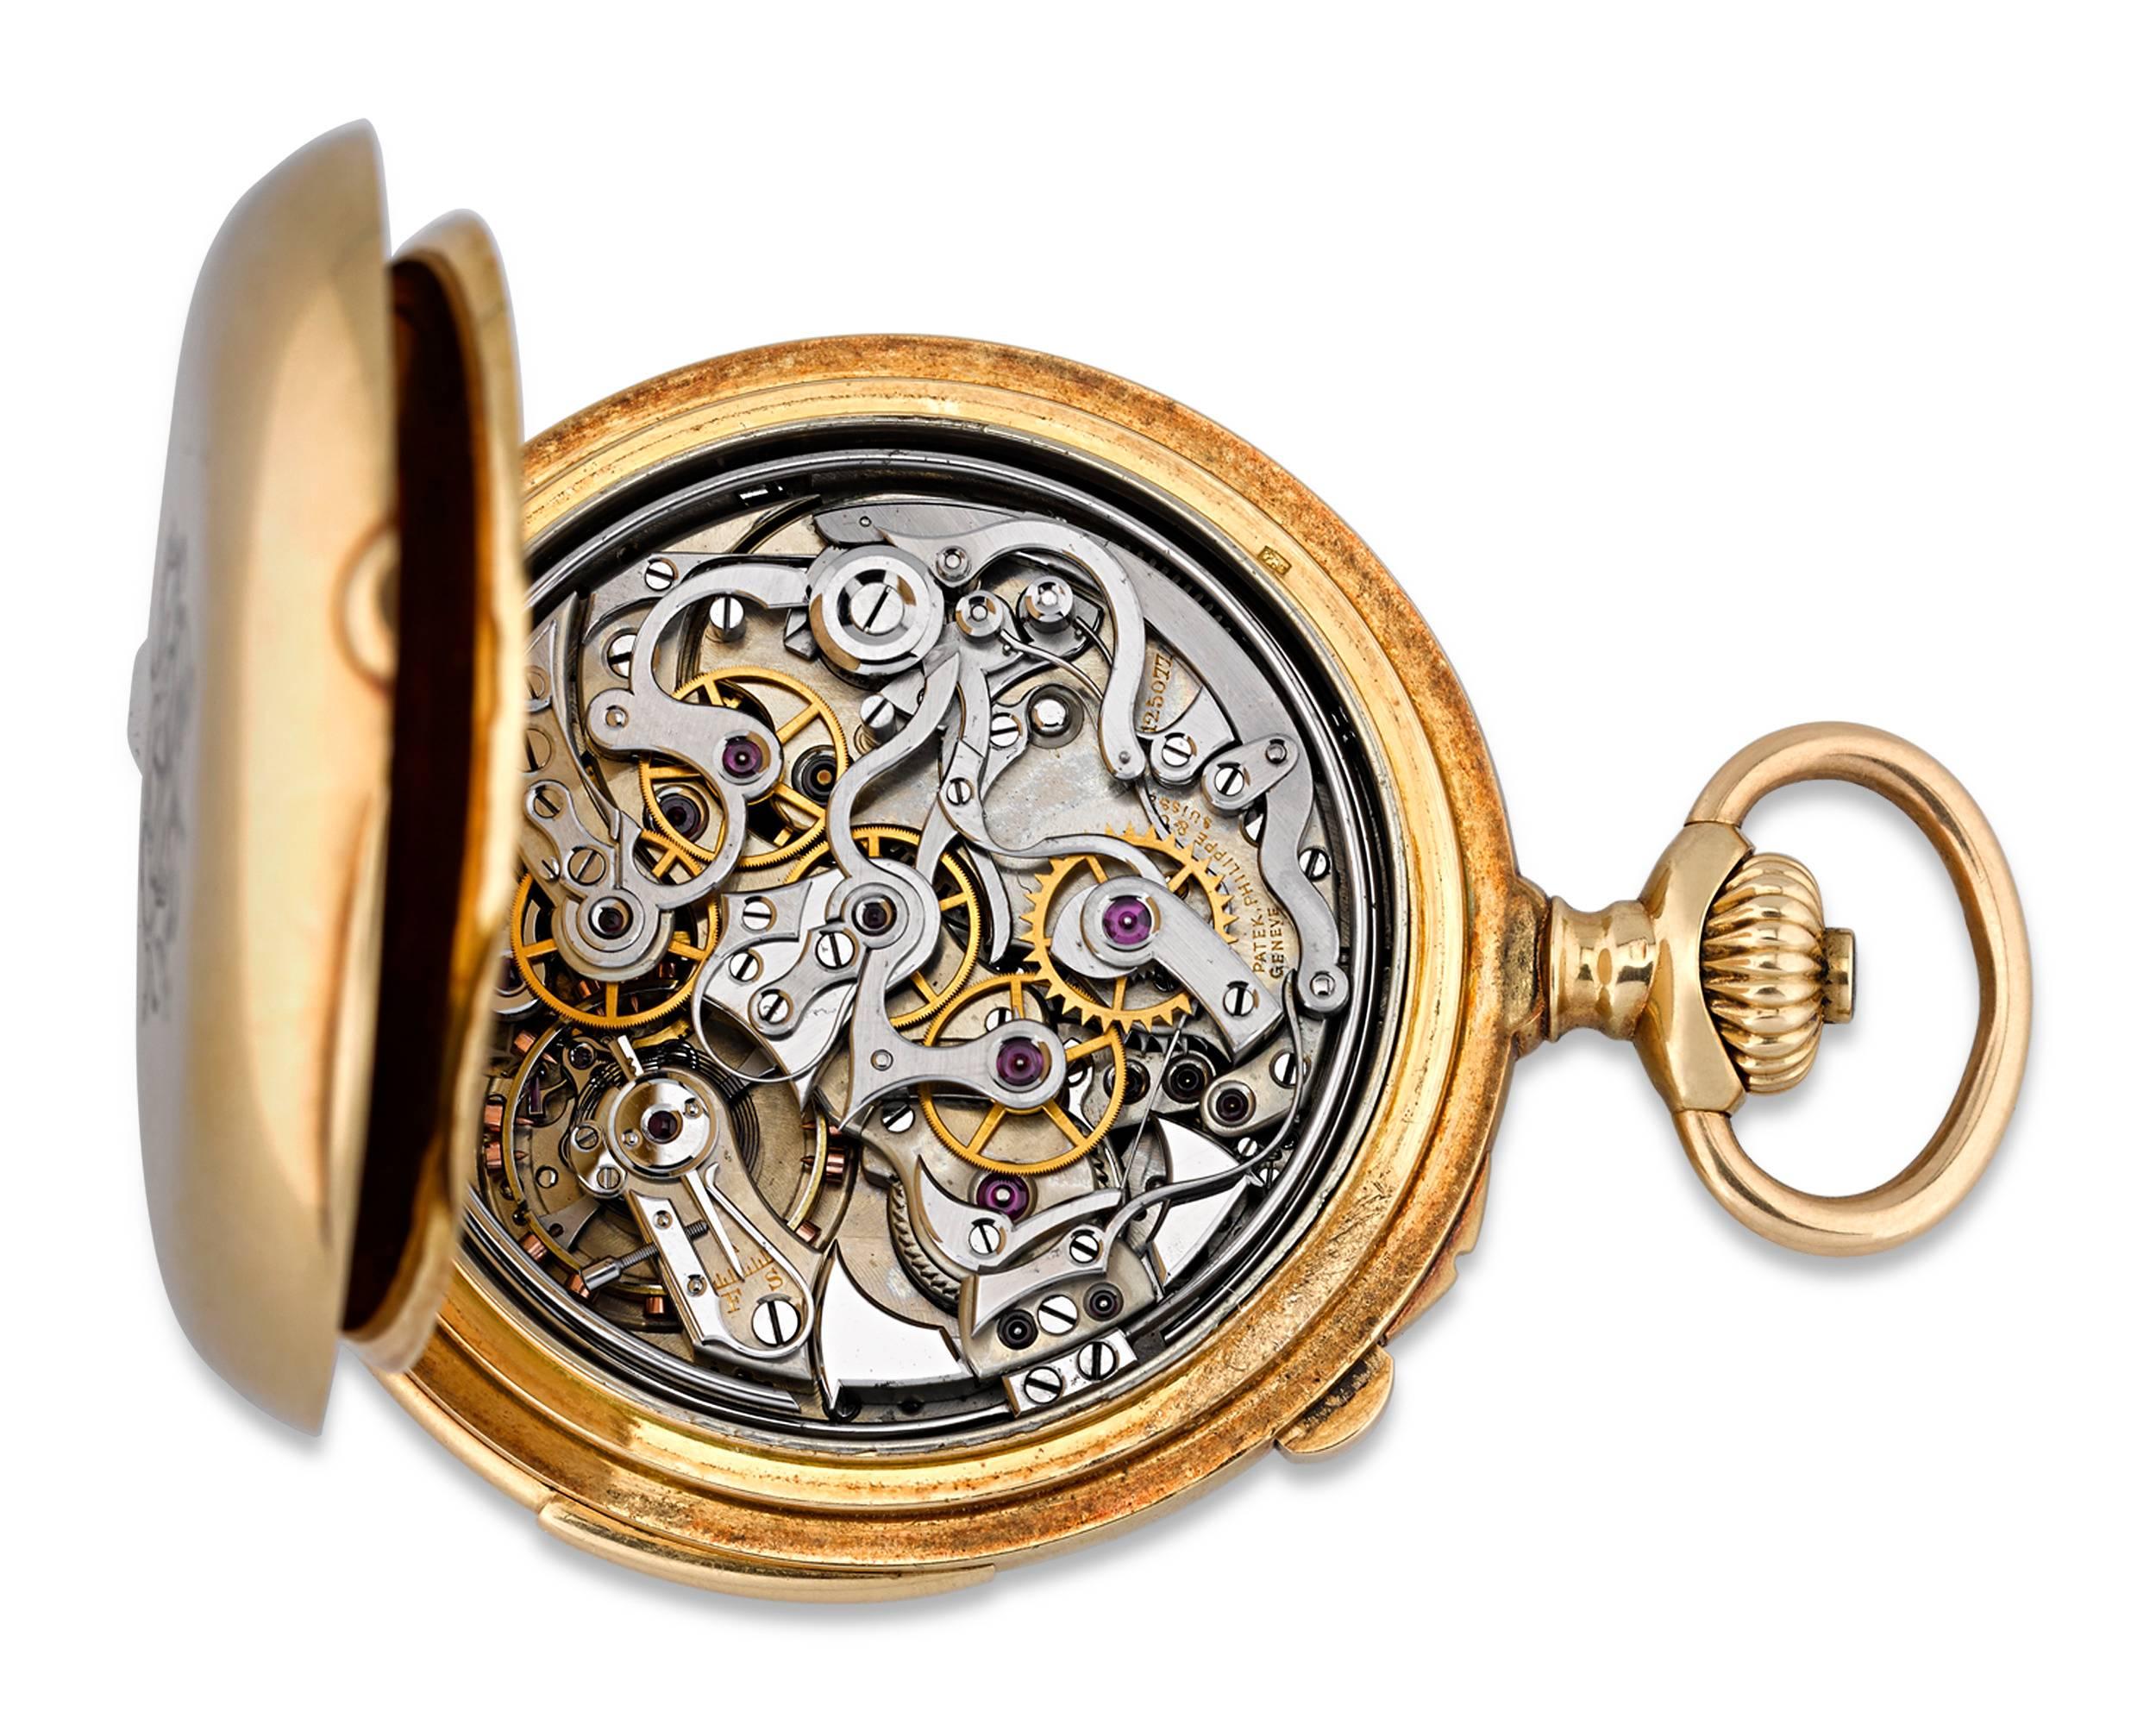 minute repeater pocket watch